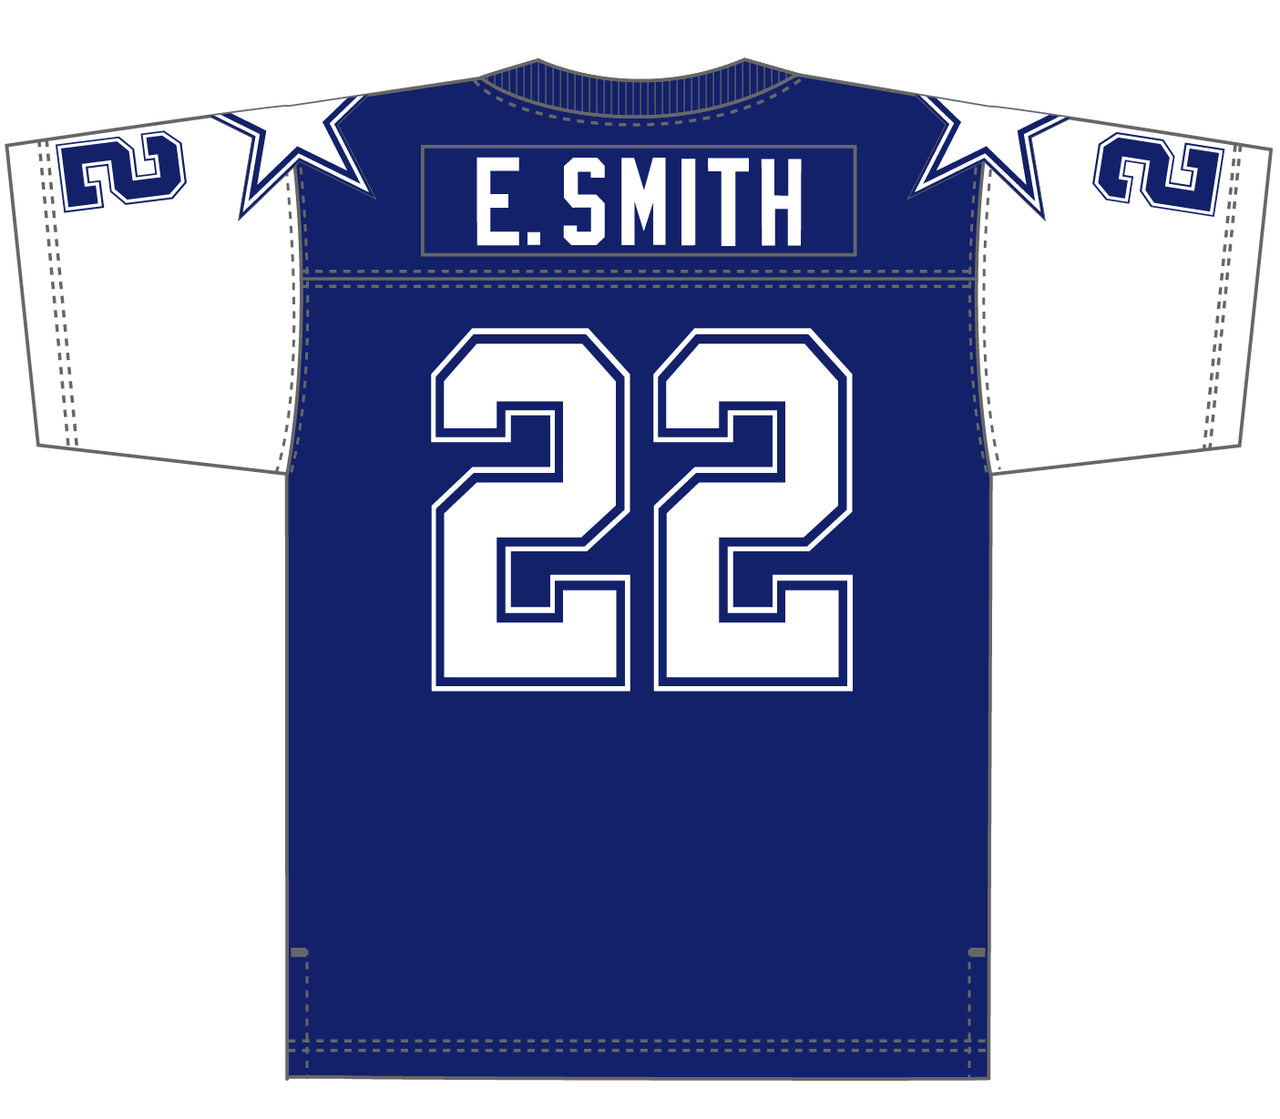 Mitchell & Ness Youth Mitchell & Ness Emmitt Smith Navy Dallas Cowboys  Retired Player Legacy Jersey